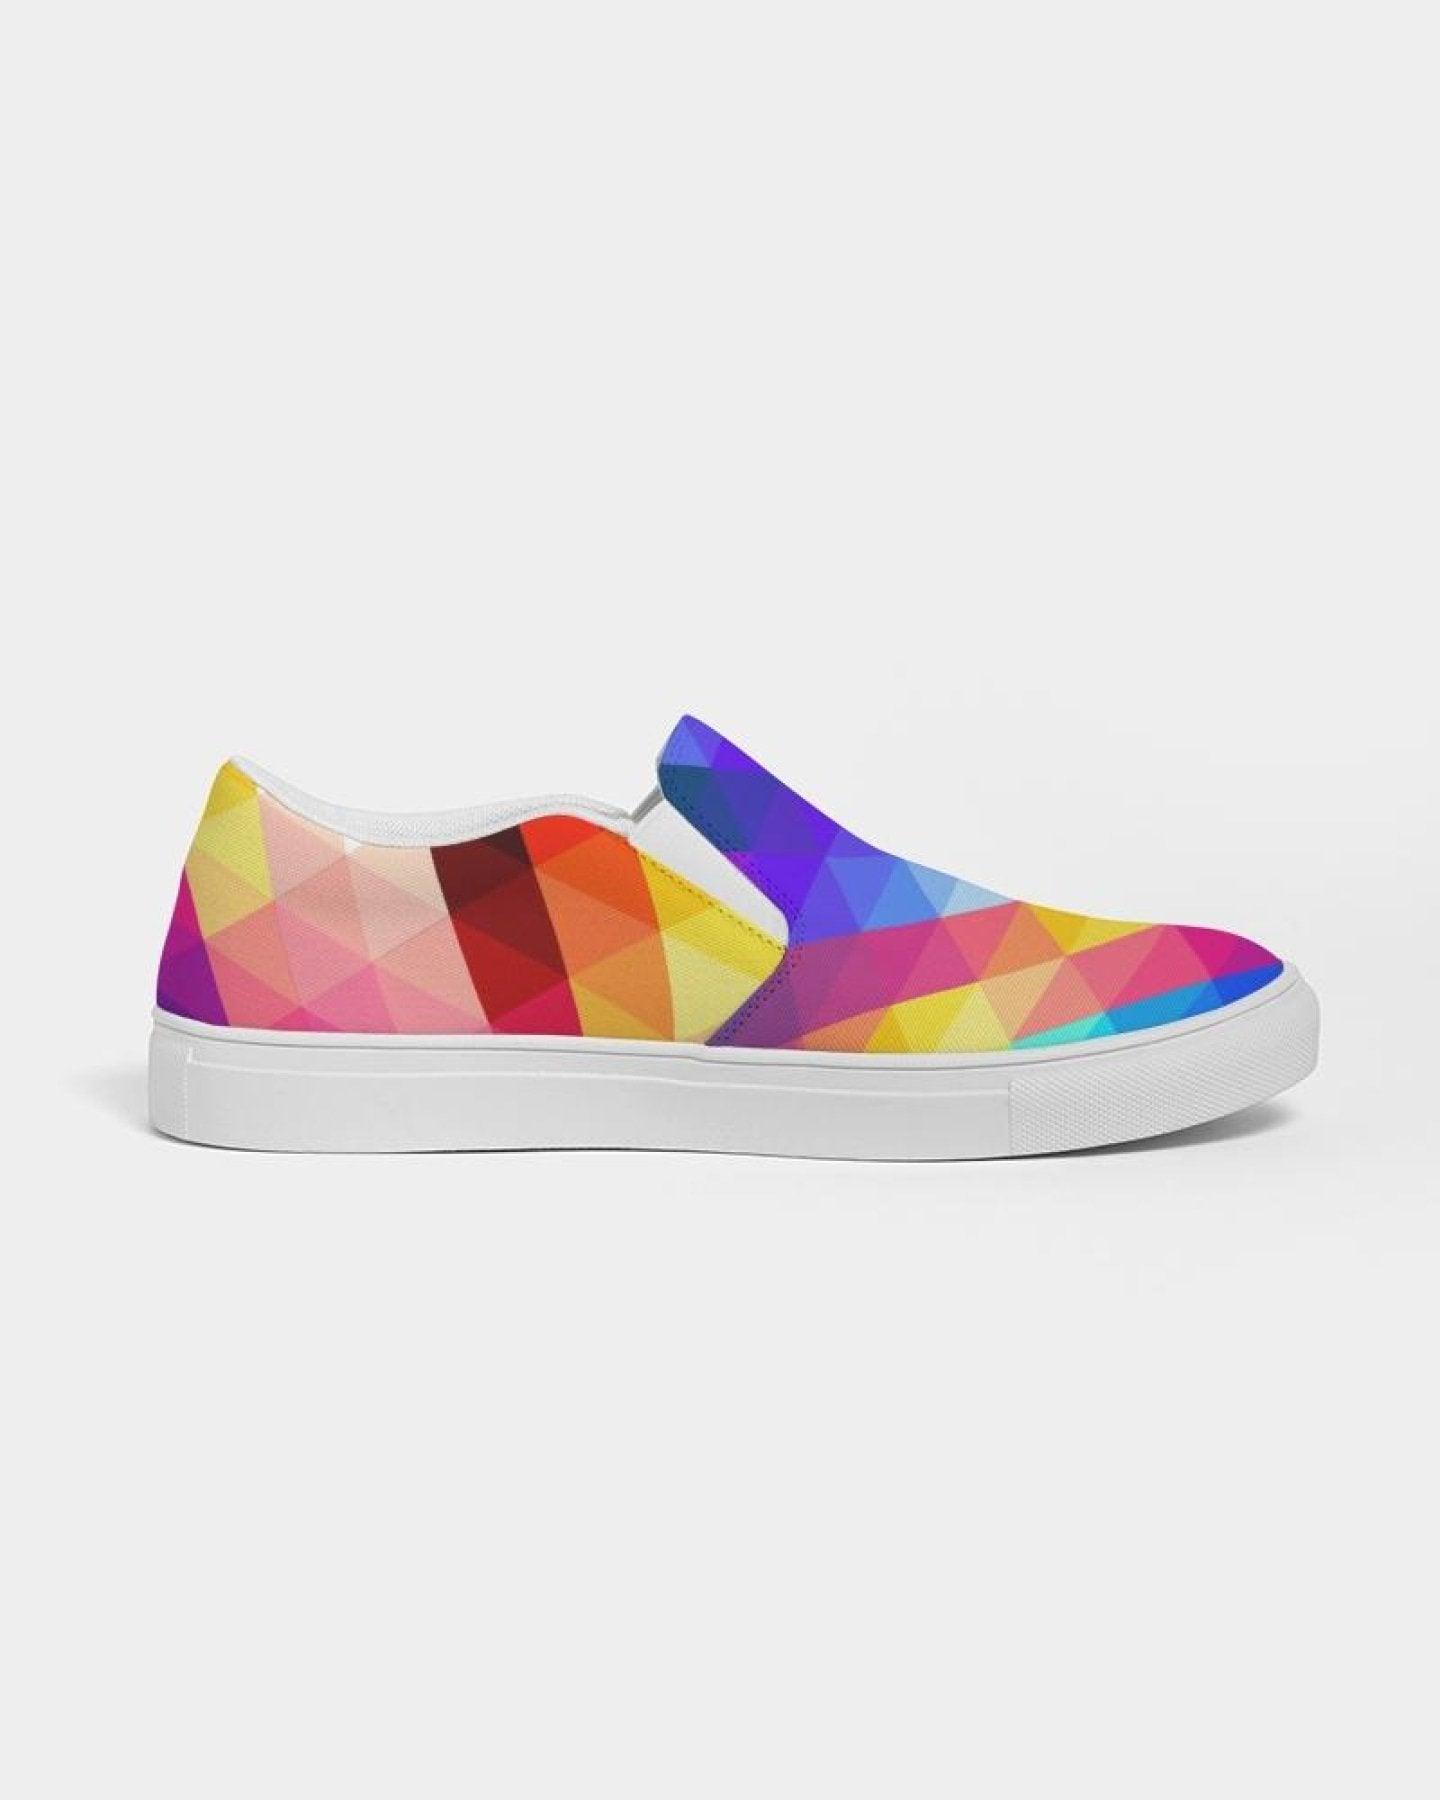 Womens Sneakers - Canvas Slip On Shoes, Multicolor Retro Print - VirtuousWares:Global